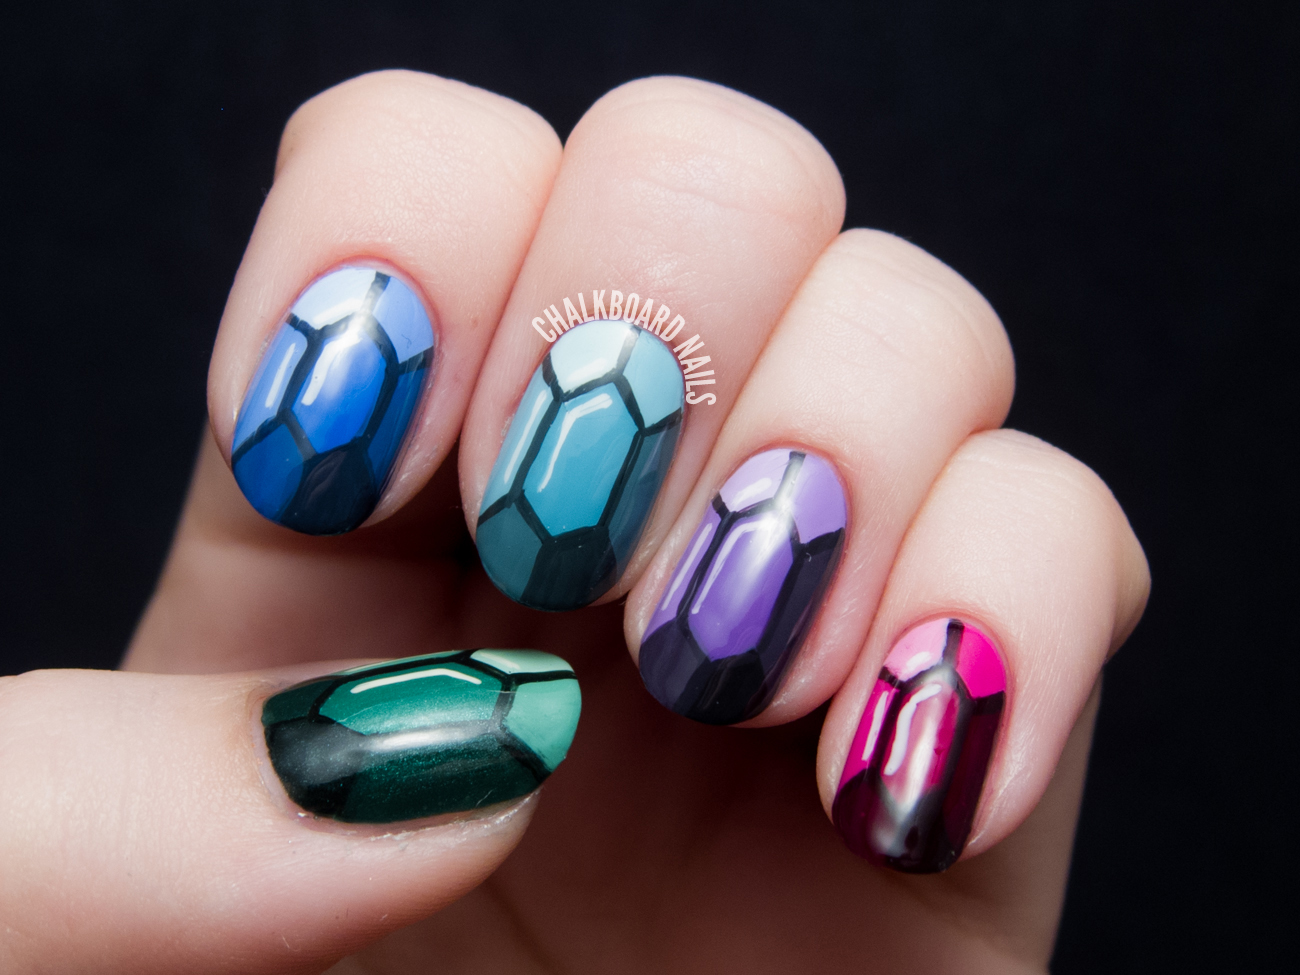 Quartz Nail Art Tutorial: Adding Glitter and Gems for a Glamorous Touch - wide 1